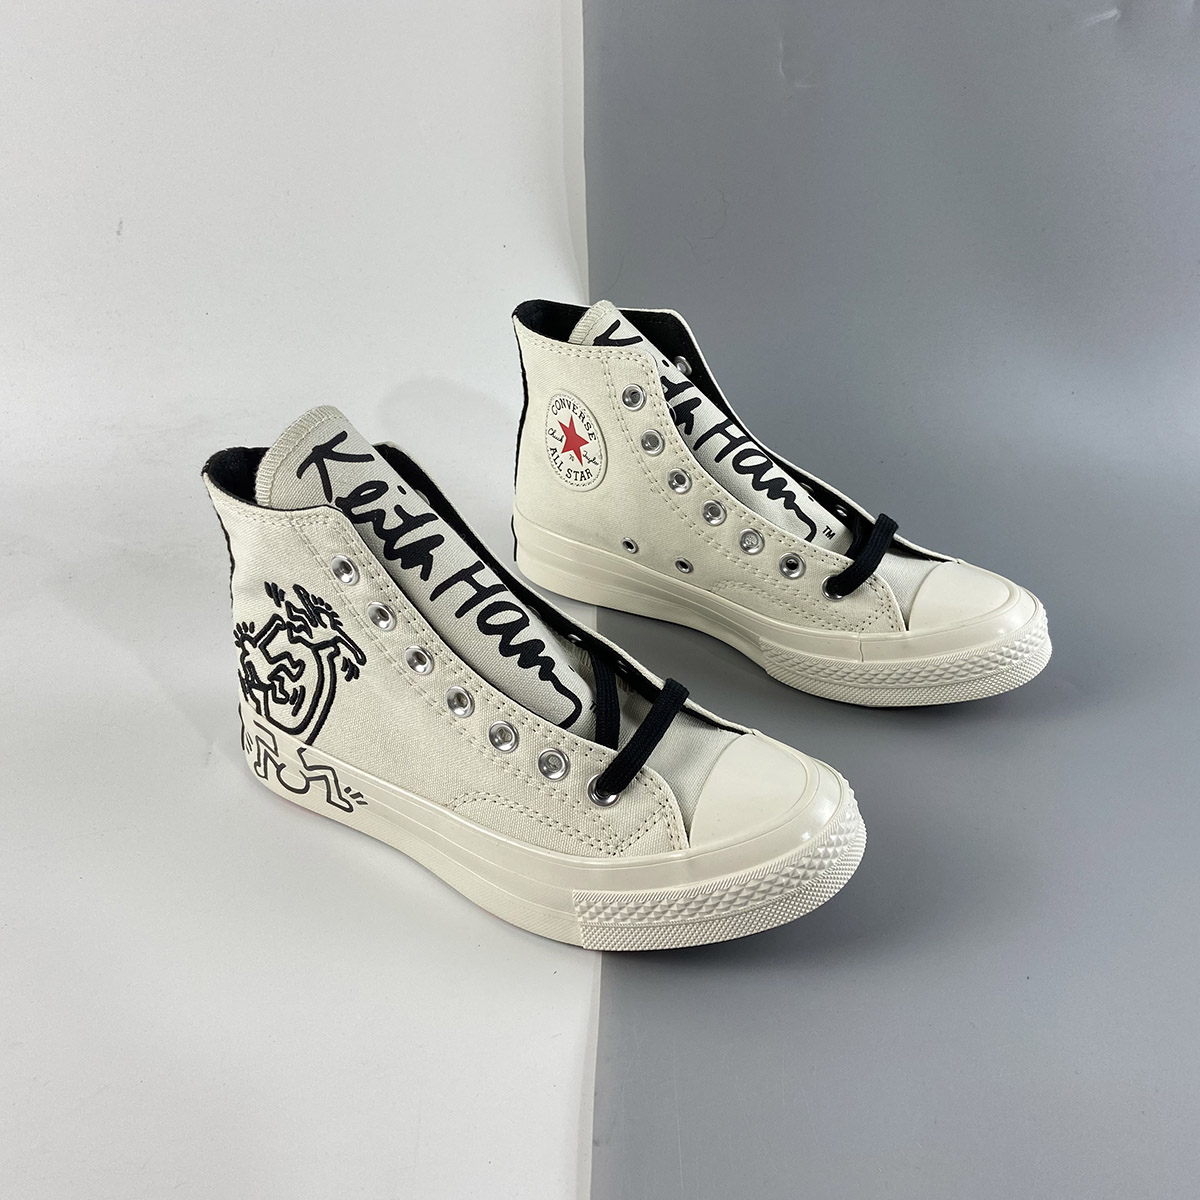 Keith Haring x Converse Chuck 70 Hi Egret Black For Sale – The Sole Line